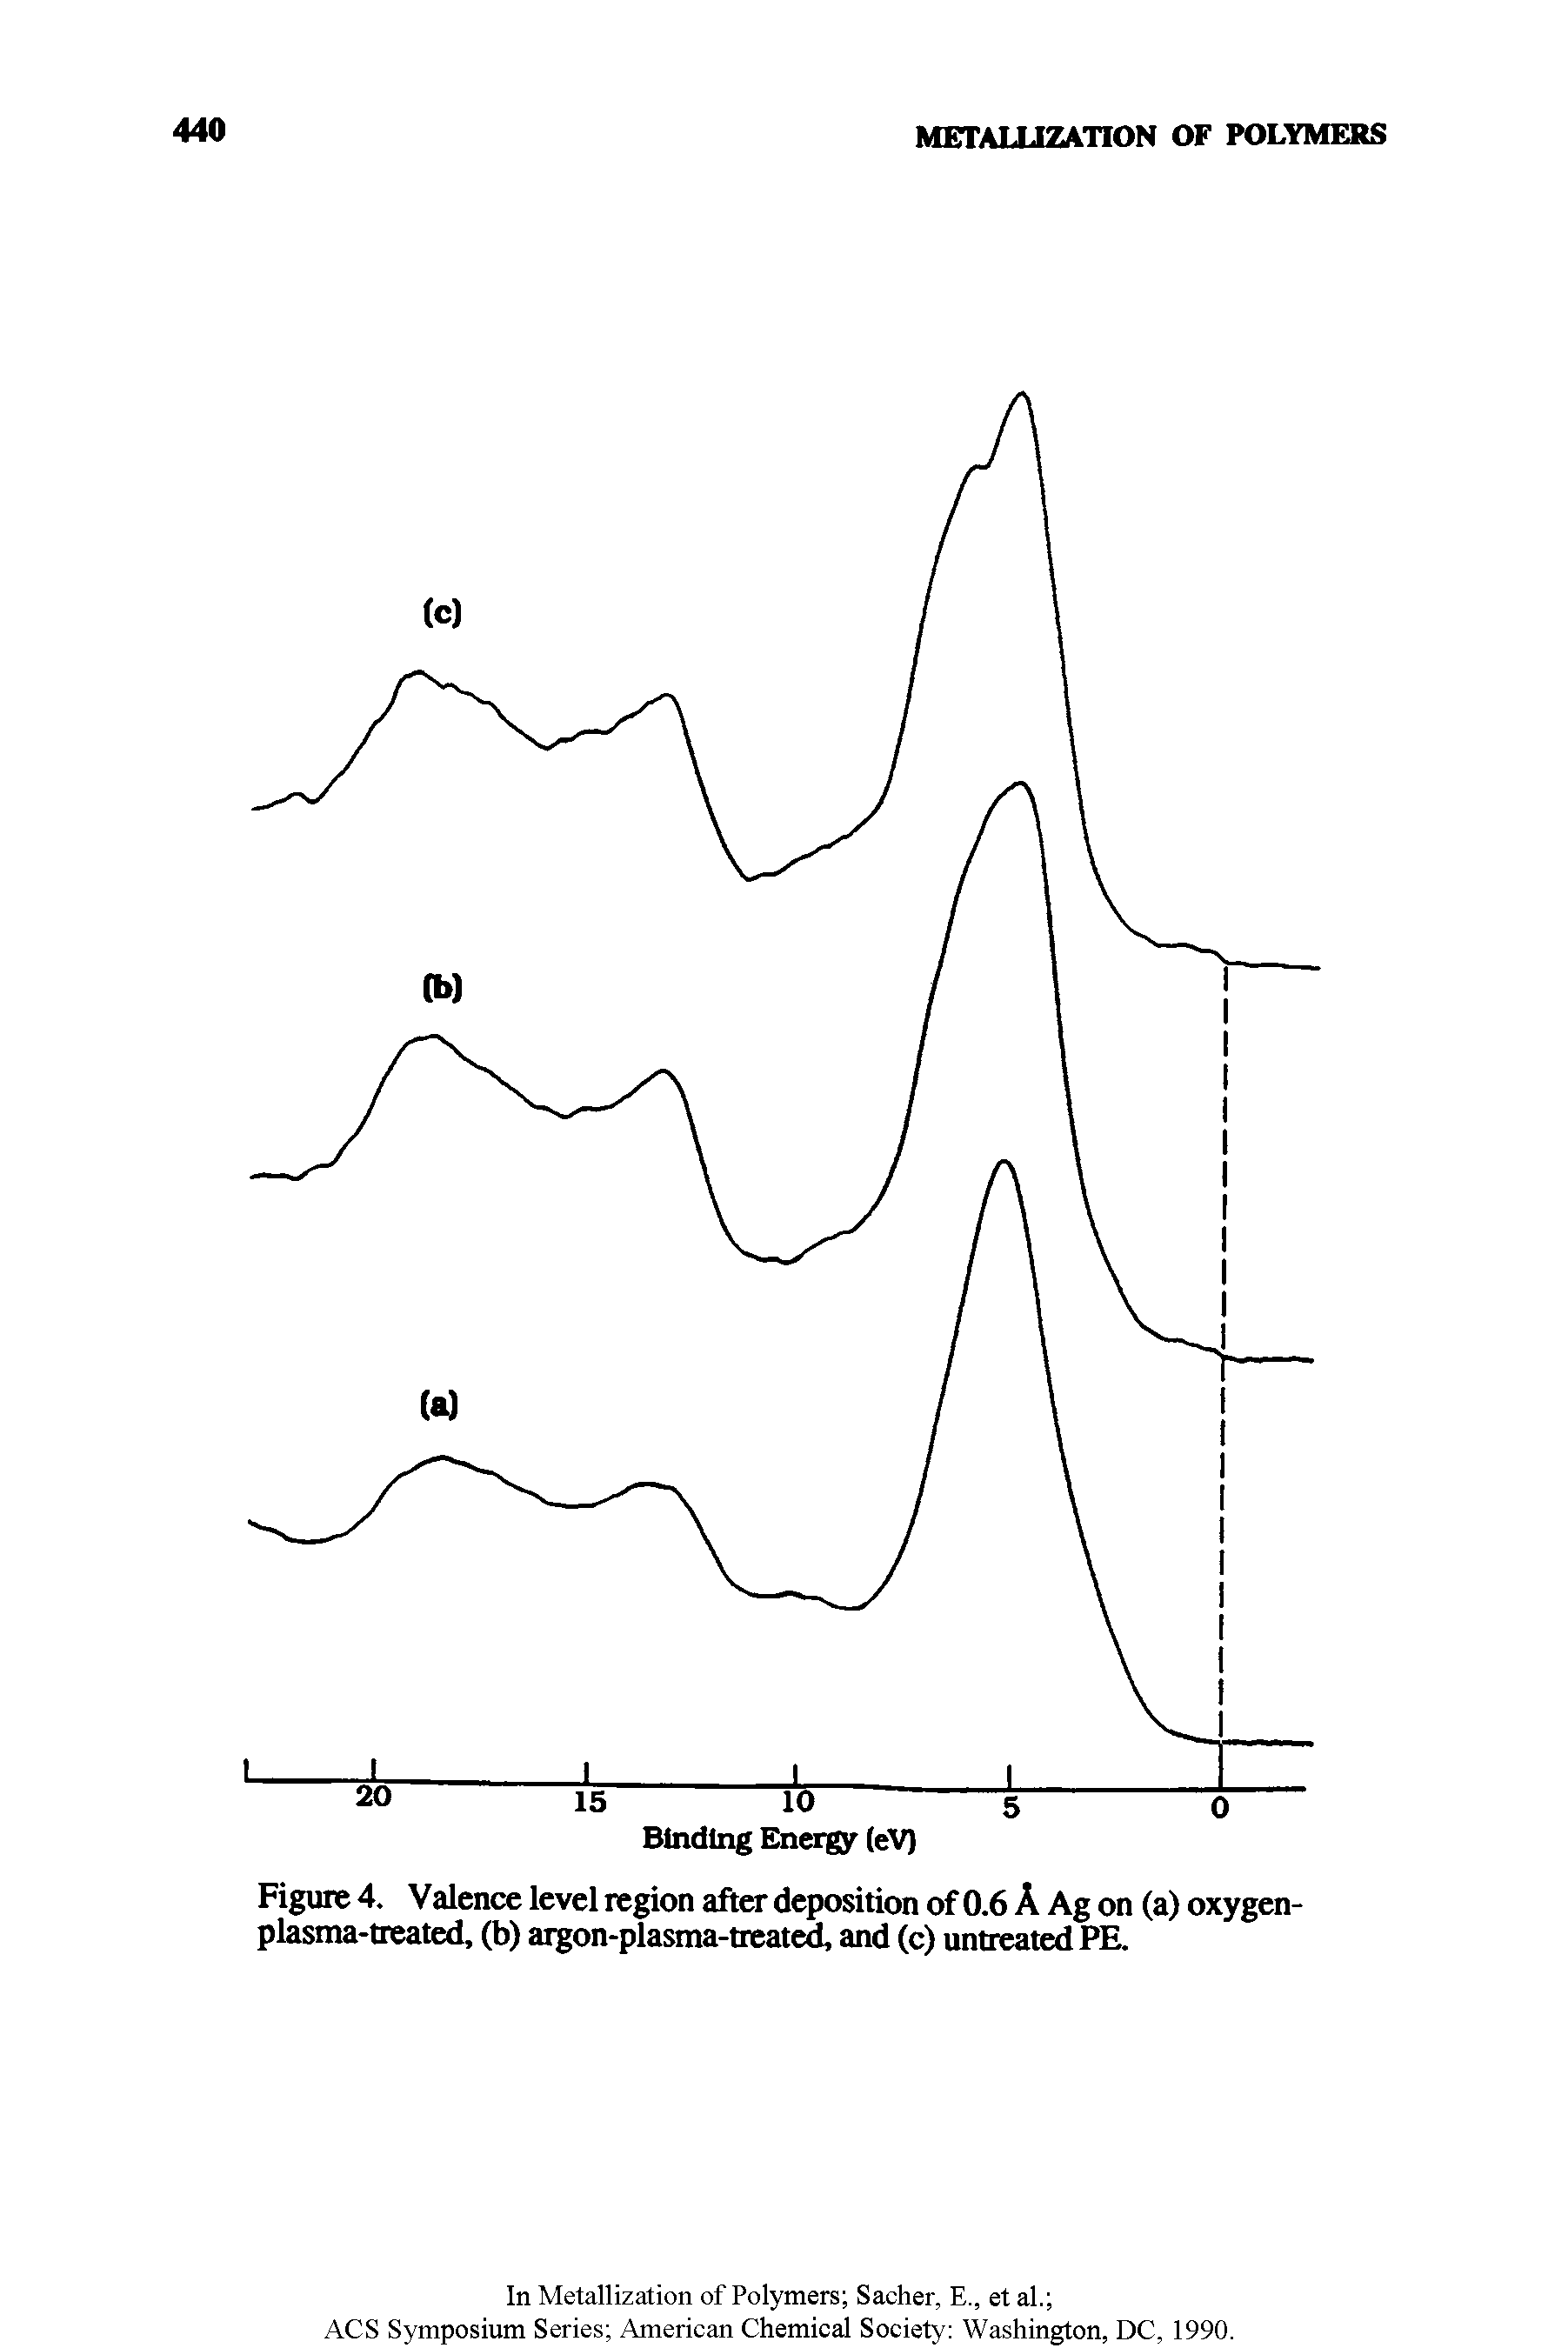 Figure 4. Valence level region after deposition of 0.6 A Ag on (a) oxygen-plasma-treated, (b) argon-plasma-treated, and (c) untreated PE.